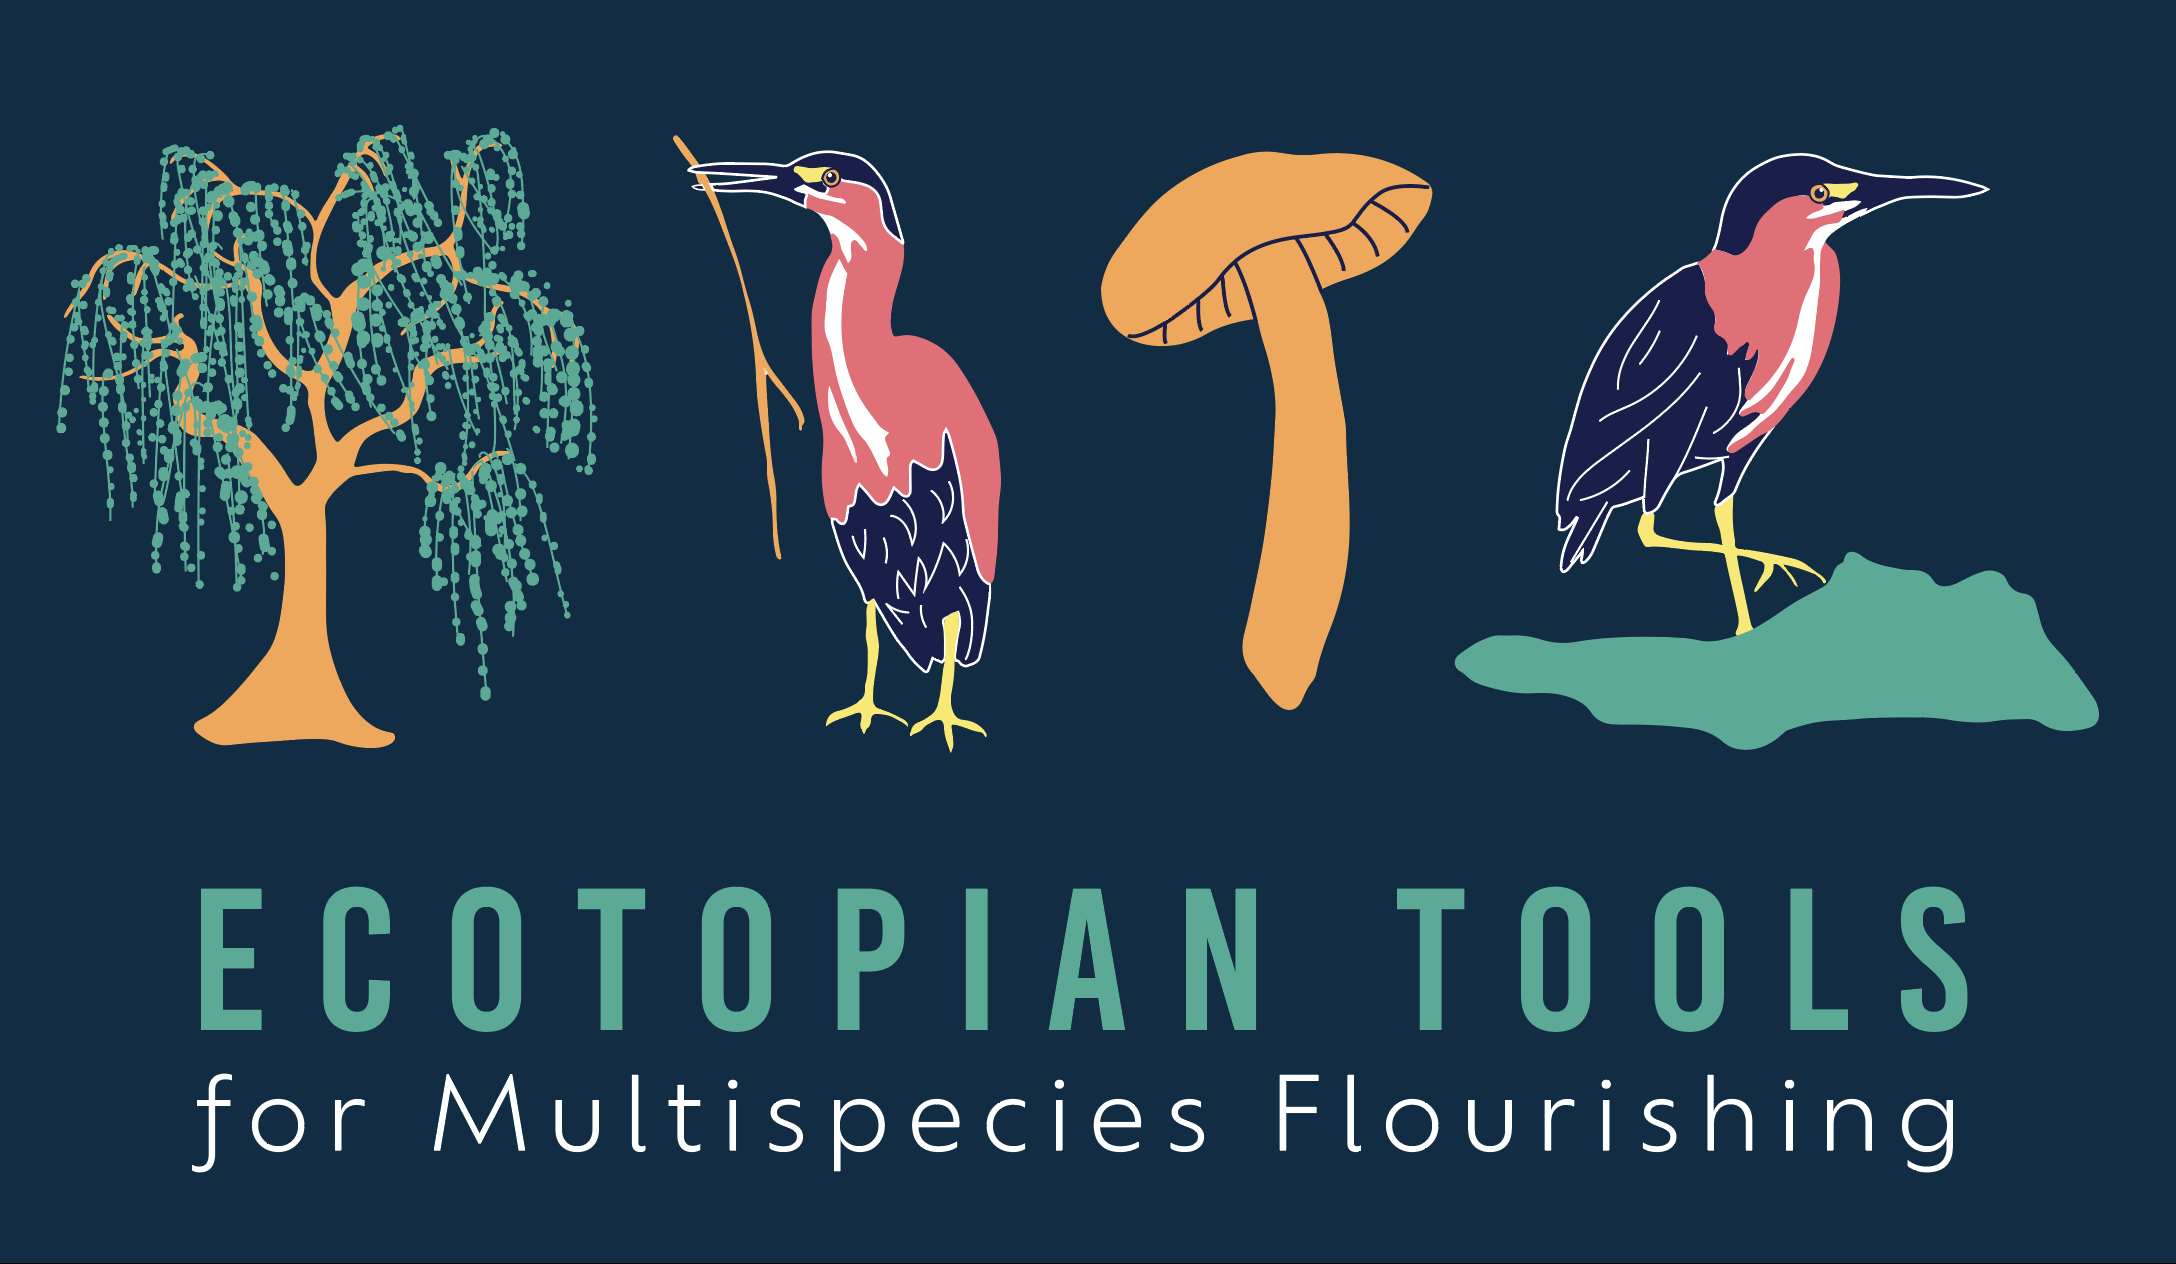 Text: "Ecotopian Tools for Multispecies Flourishing" under project logos of a tree, green heron, and mushroom.